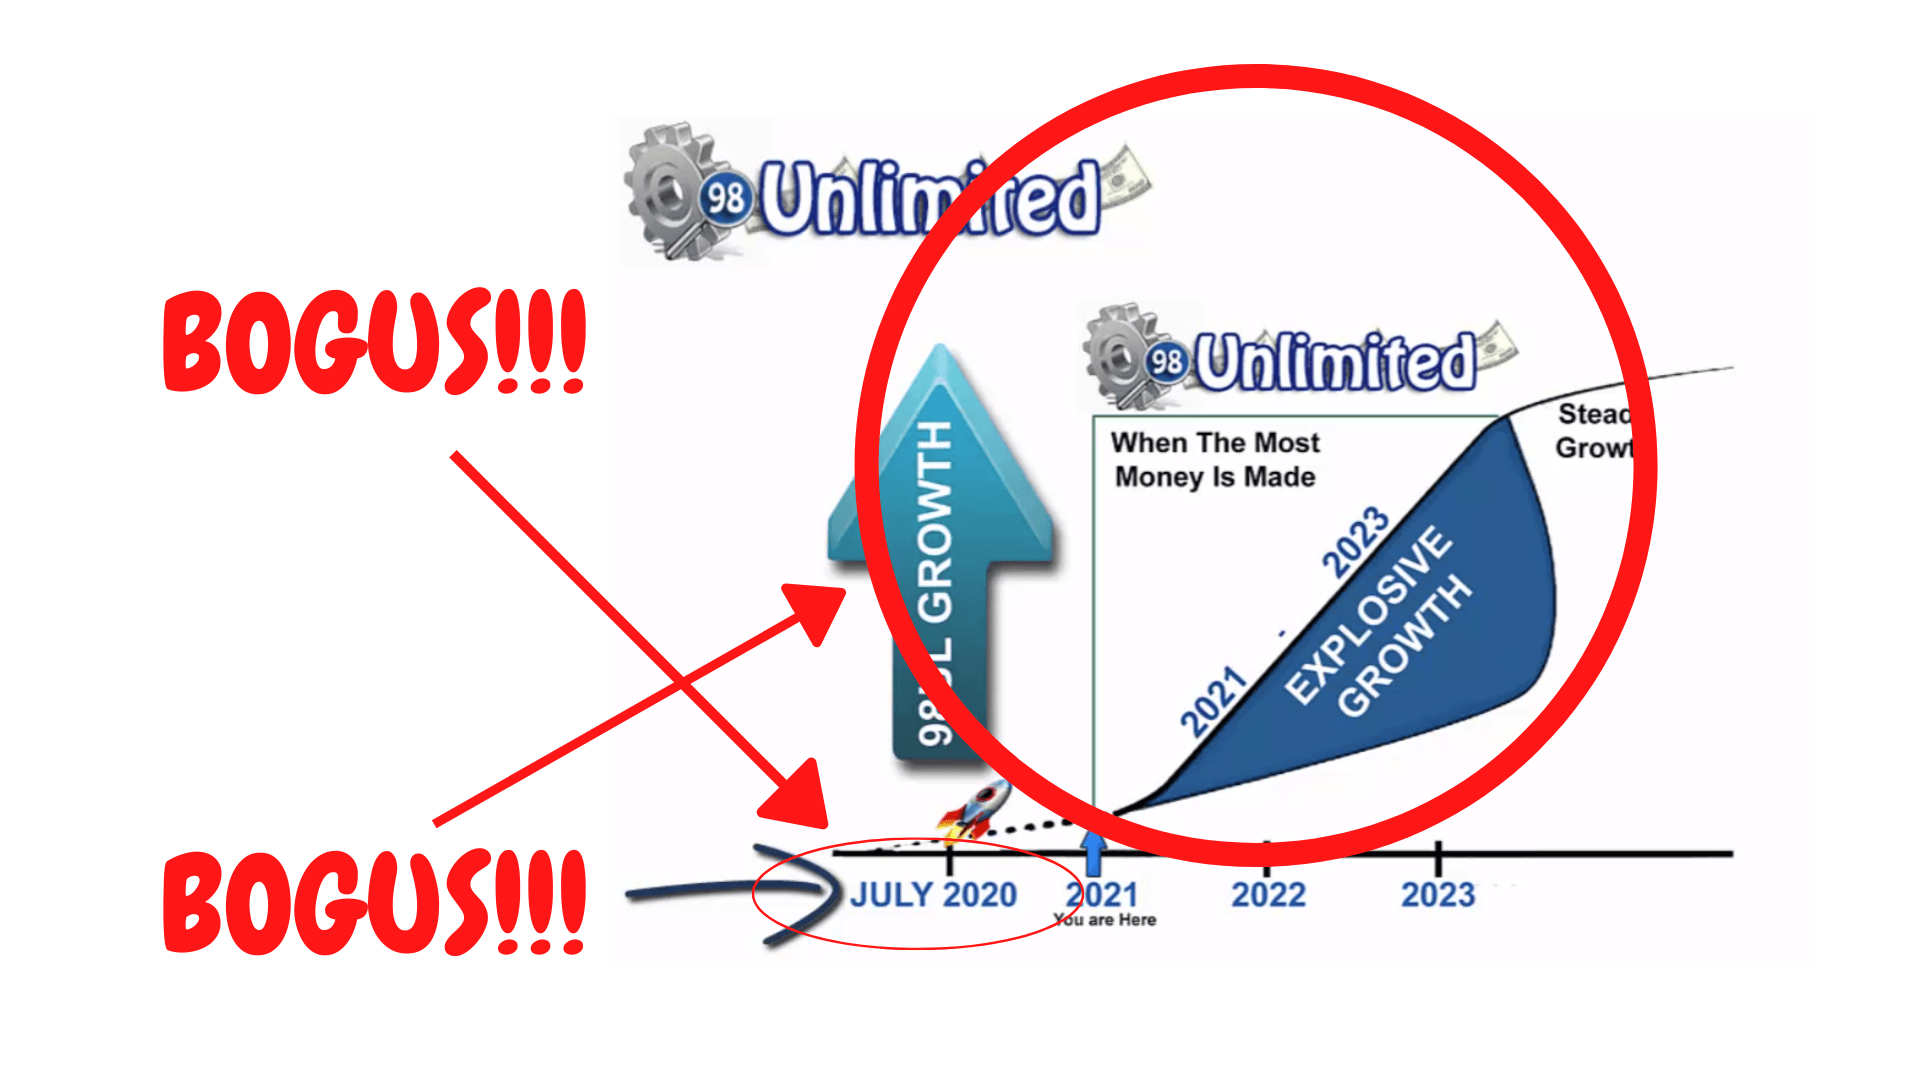 98 Unlimited misleading business structure